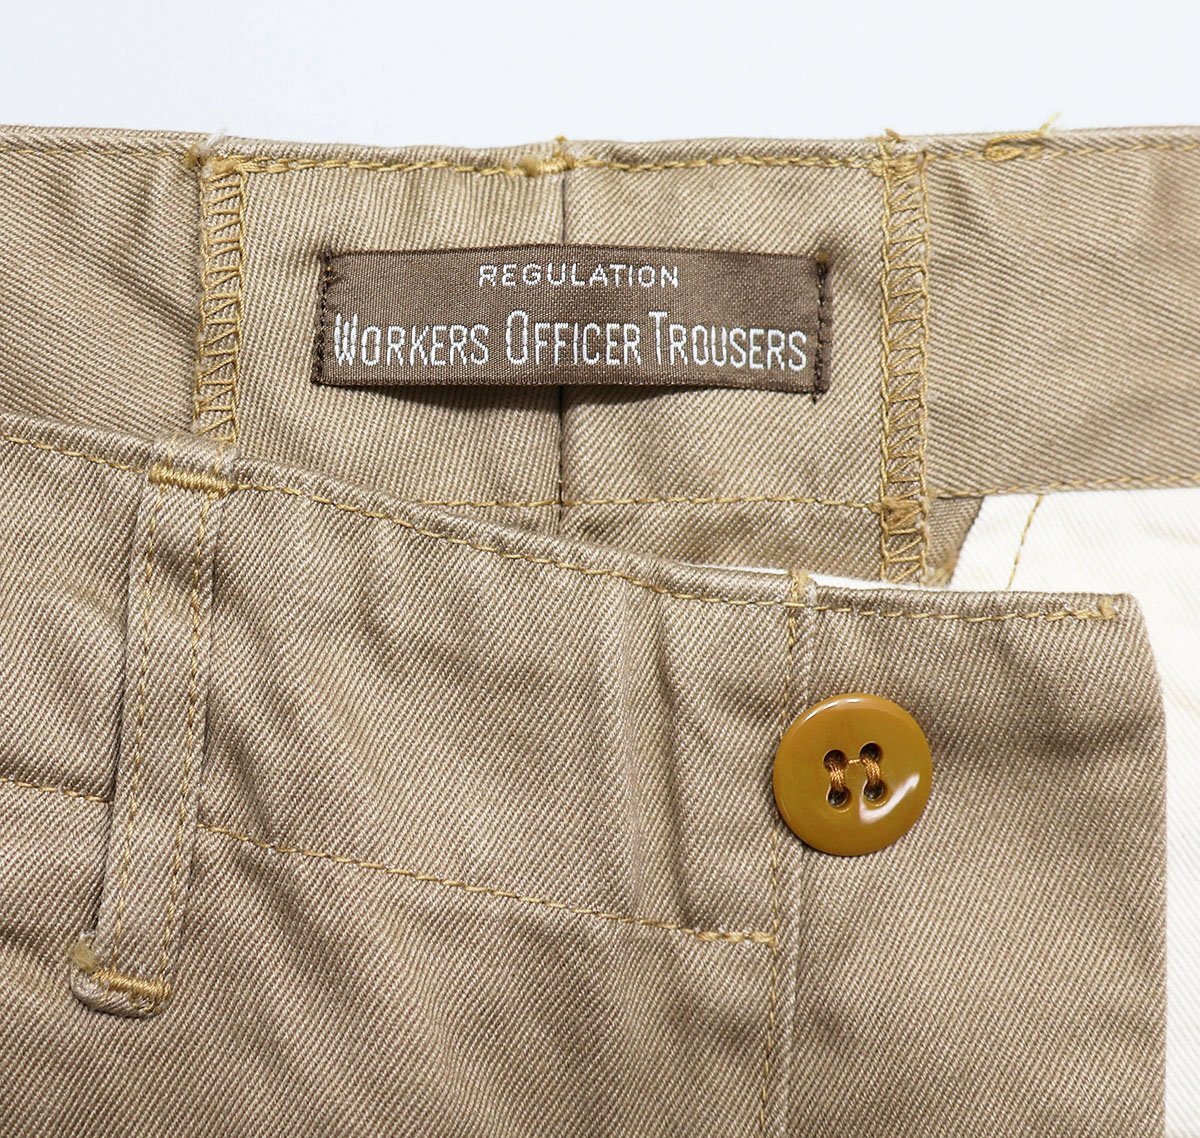 Workers K&T H MFG Co (ワーカーズ) Officer Trousers Standard Fit Type 2 / オフィサートラウザー タイプ2 未使用品 Beige Chino w34_画像7